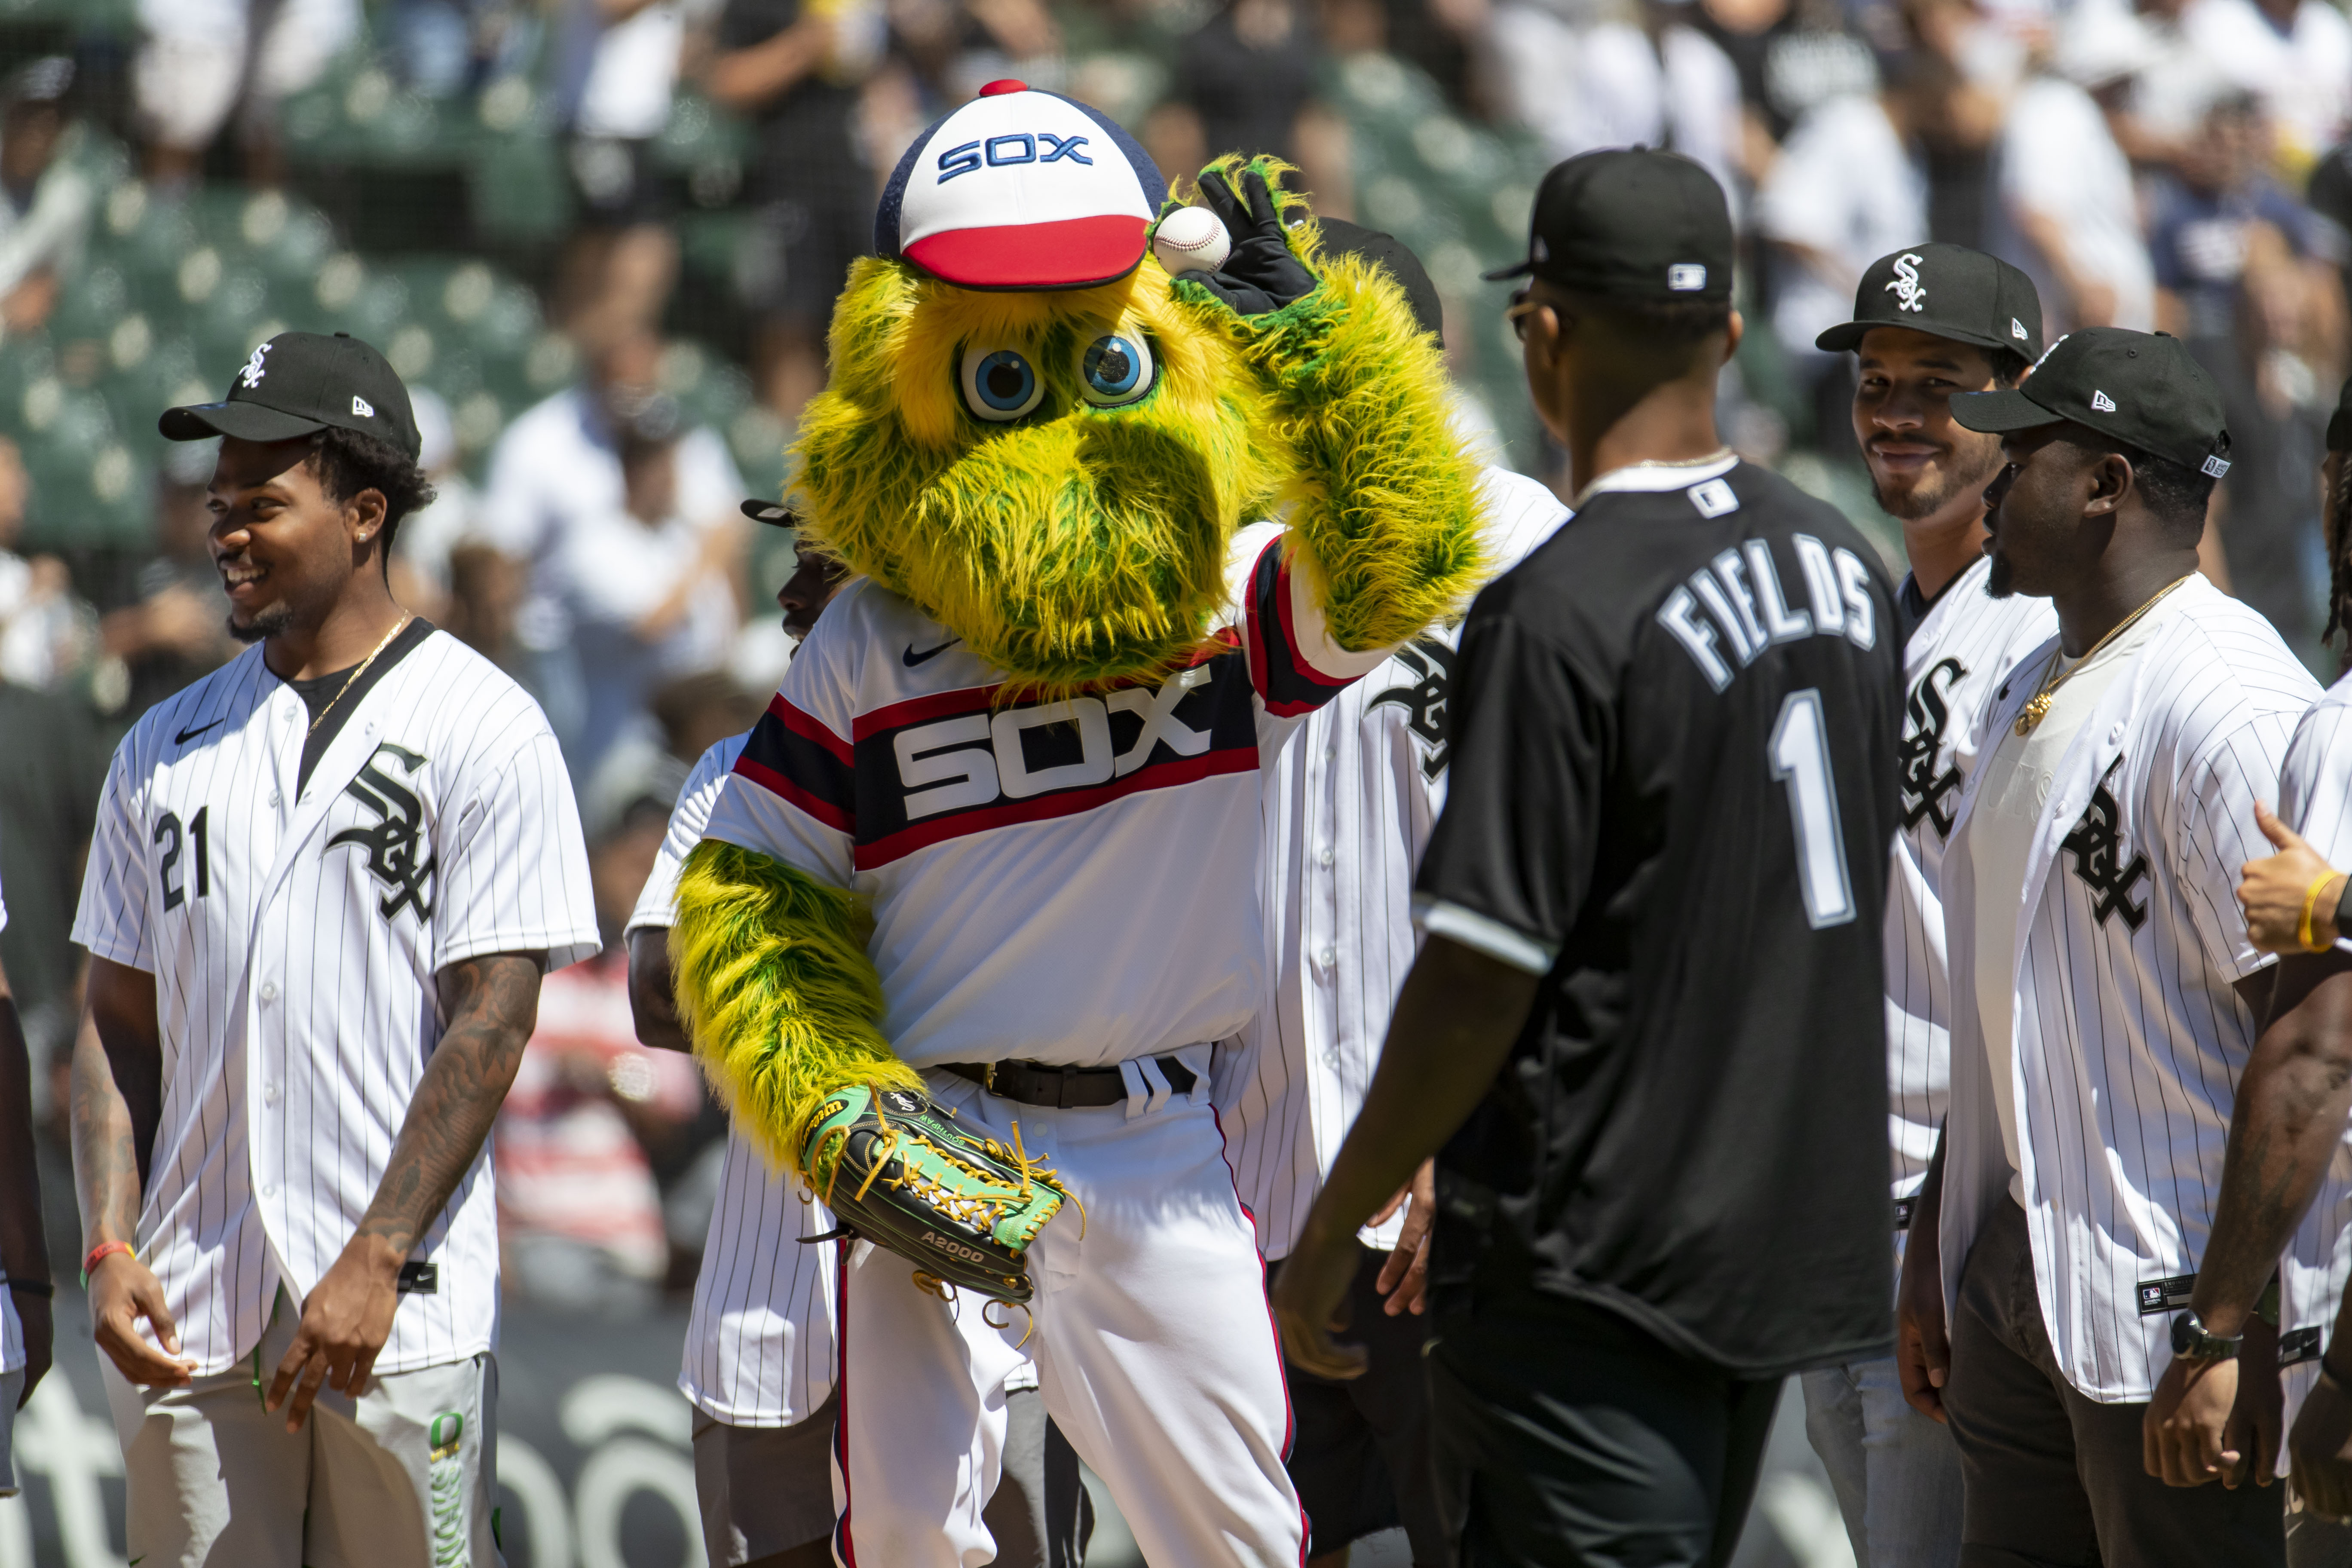 Speak Out: Another explanation for Southpaw's name origin